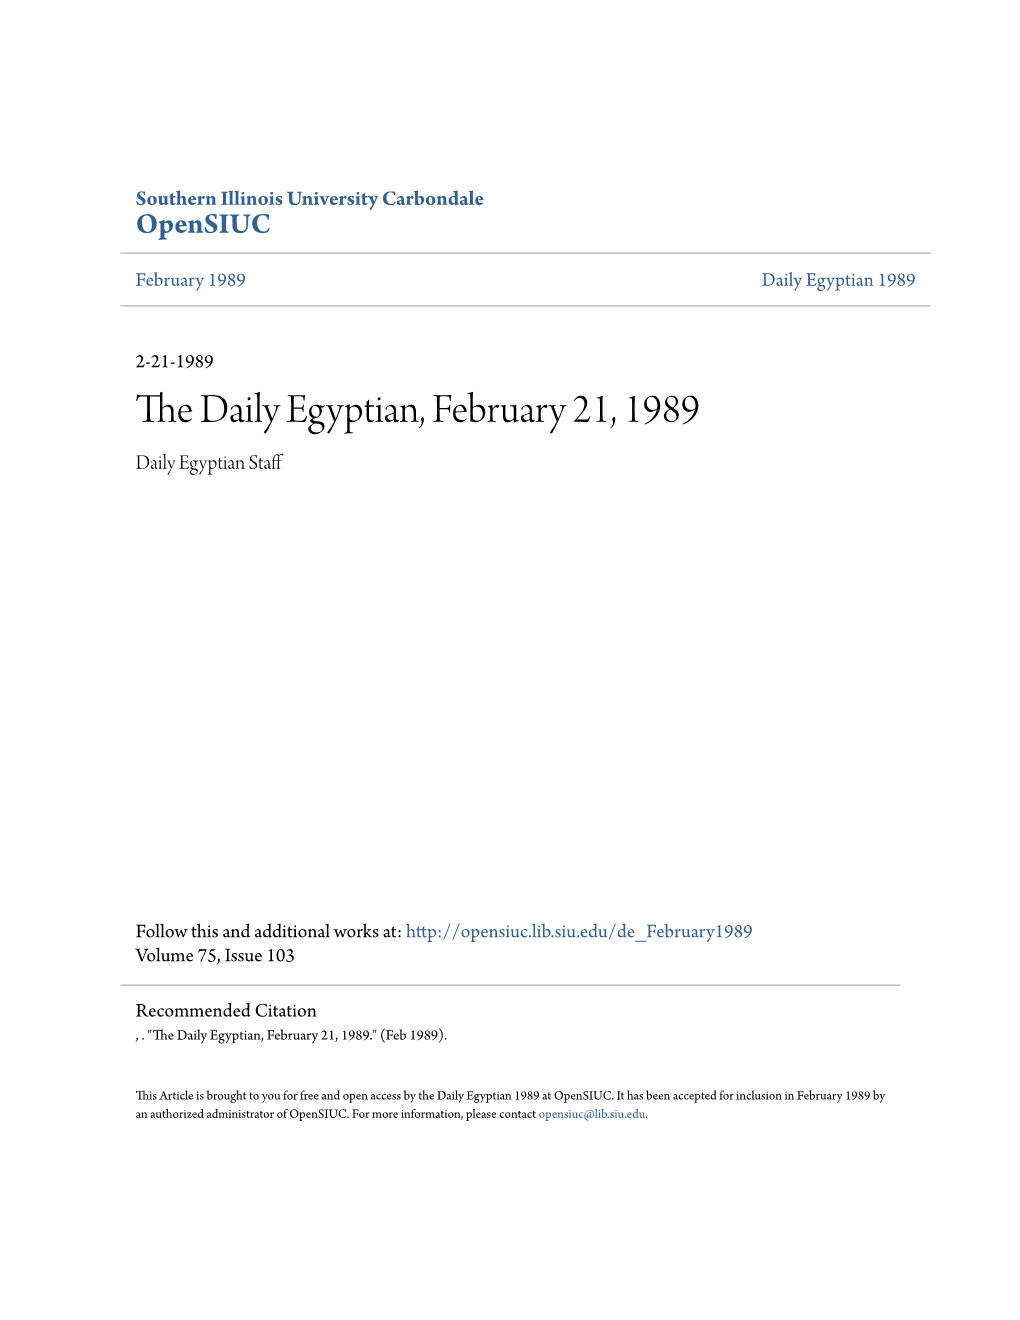 The Daily Egyptian, February 21, 1989